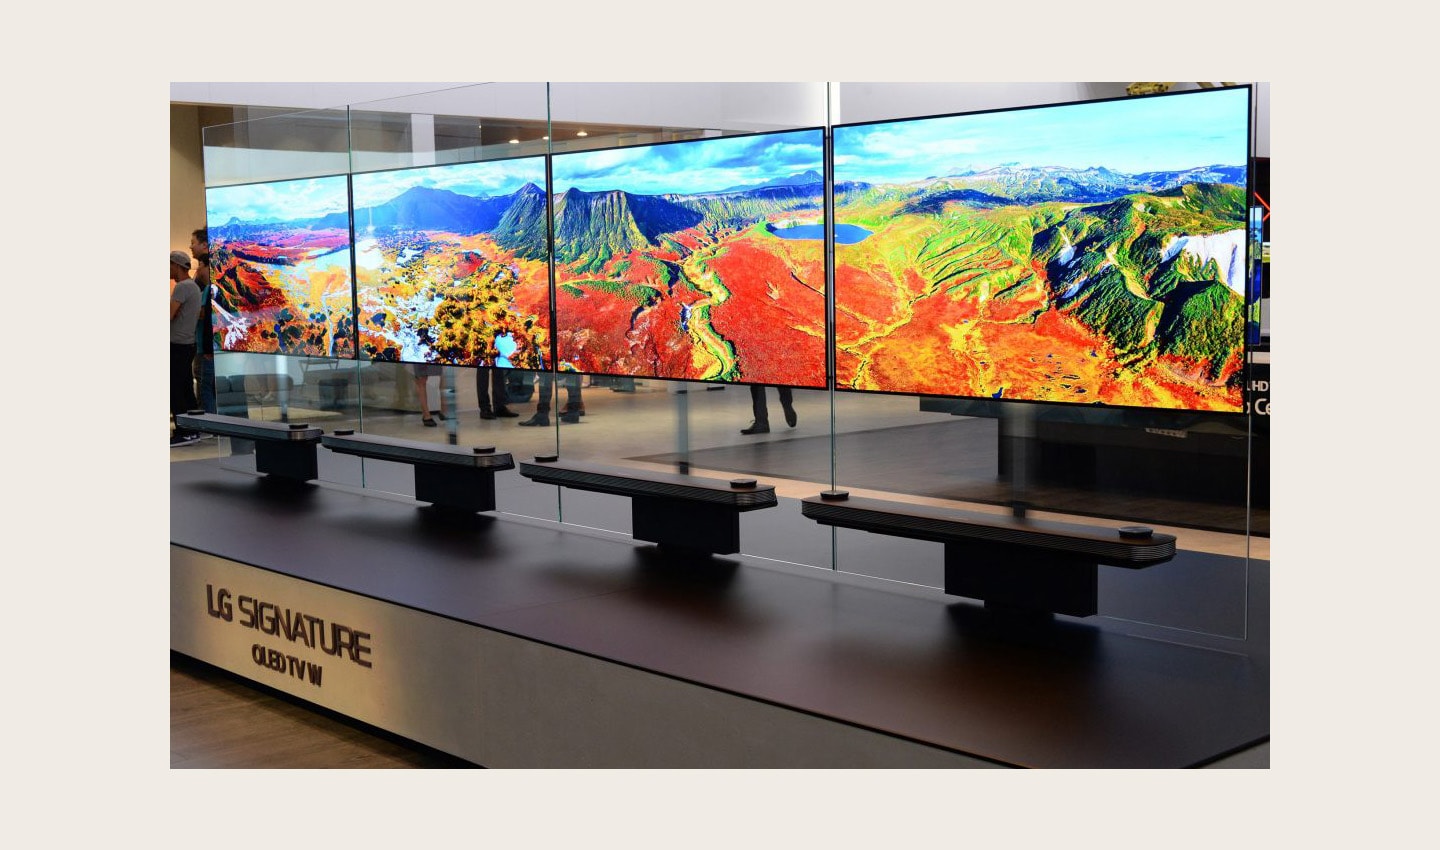 Another view of four LG SIGNATURE OLED TV W sets installed side by side on a display stand.